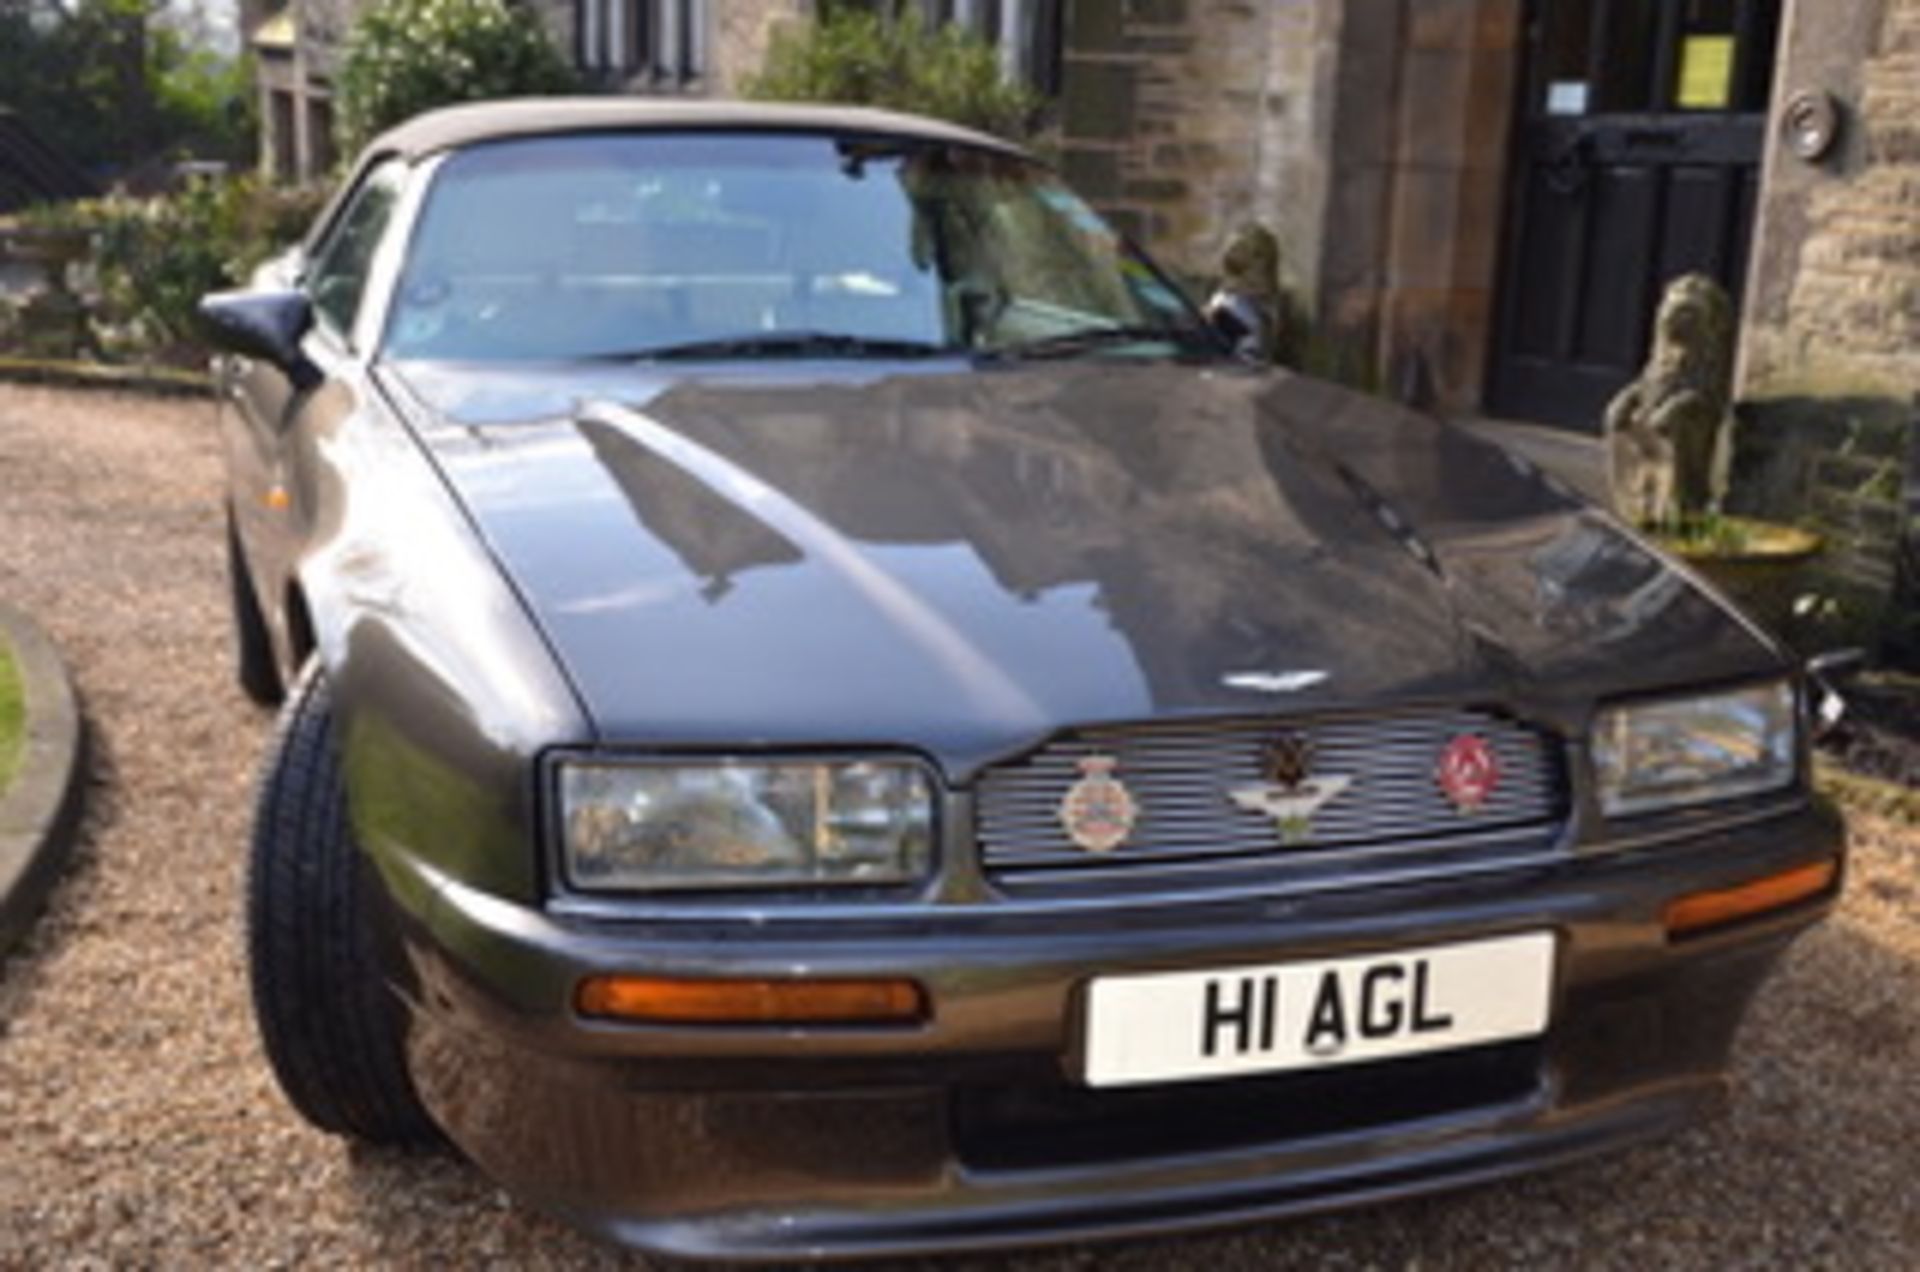 1993 Aston Martin Virage Volante - Having 11 months MOT and aviators number plate H1 AGL - Image 17 of 48